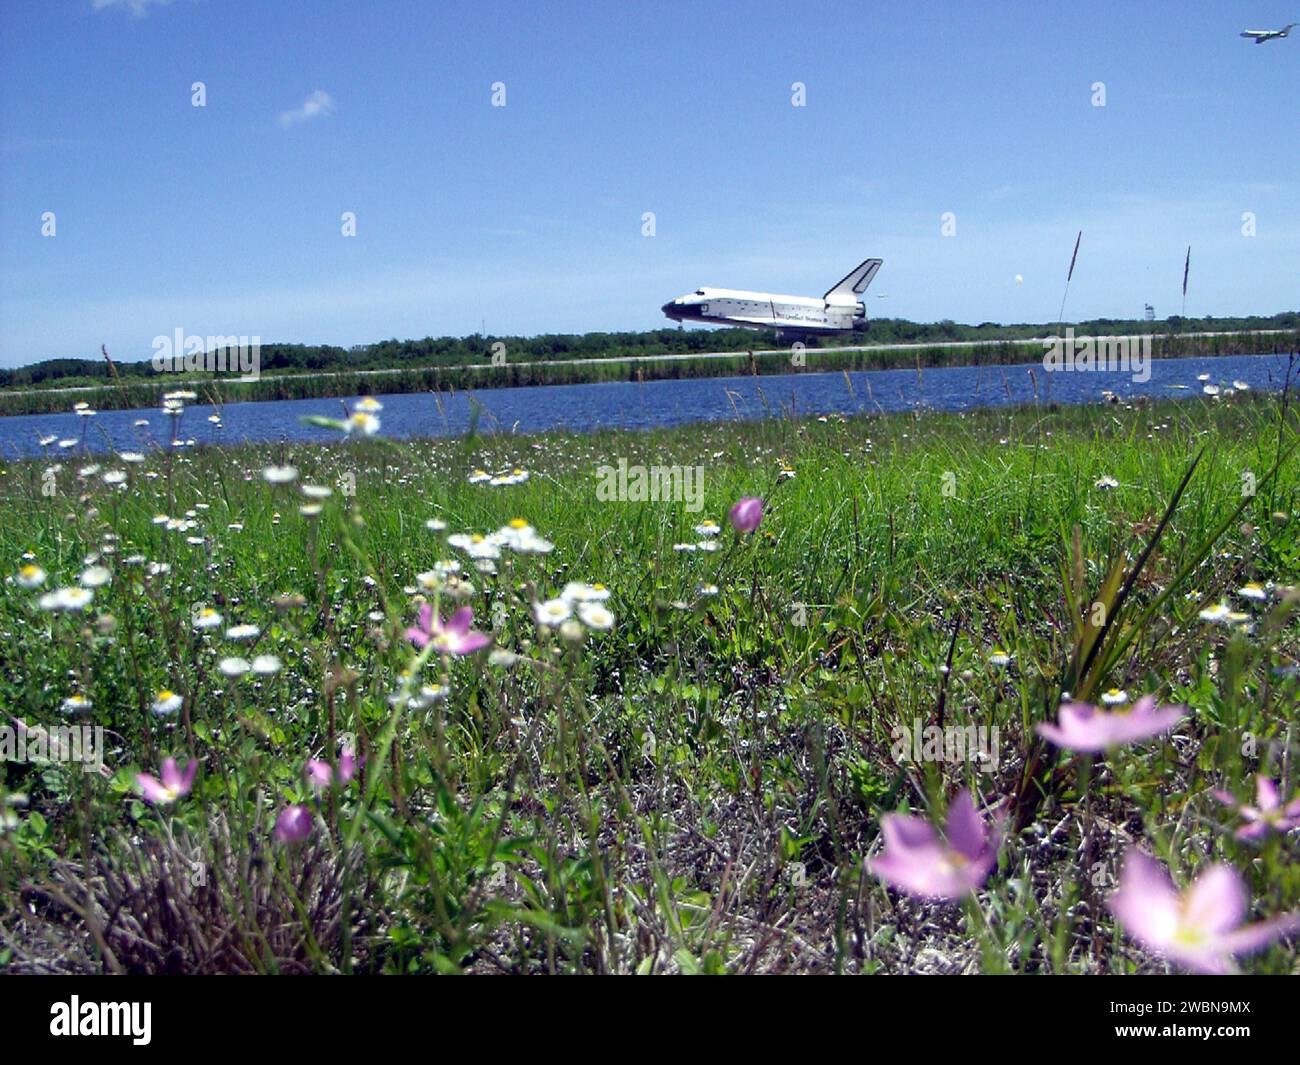 KENNEDY SPACE CENTER, FLA. - A field of wild flowers greets Atlantis as it touches down on runway 33 at KSC, the drag chute just deployed. The landing completes the 10-day, 19-hour, 4.5-million mile mission STS-110 to the International Space Station. In the upper right corner is the chase plane following Atlantis' path. The orbiter carries the returning crew Commander Michael Bloomfield, Pilot Stephen Frick and Mission Specialists Jerry Ross, Steven Smith, Ellen Ochoa, Lee Morin and Rex Walheim. Main gear touchdown was 12 26 57 p.m. EDT, nose gear touchdown was 12 27 09 p.m. and wheel stop was Stock Photo